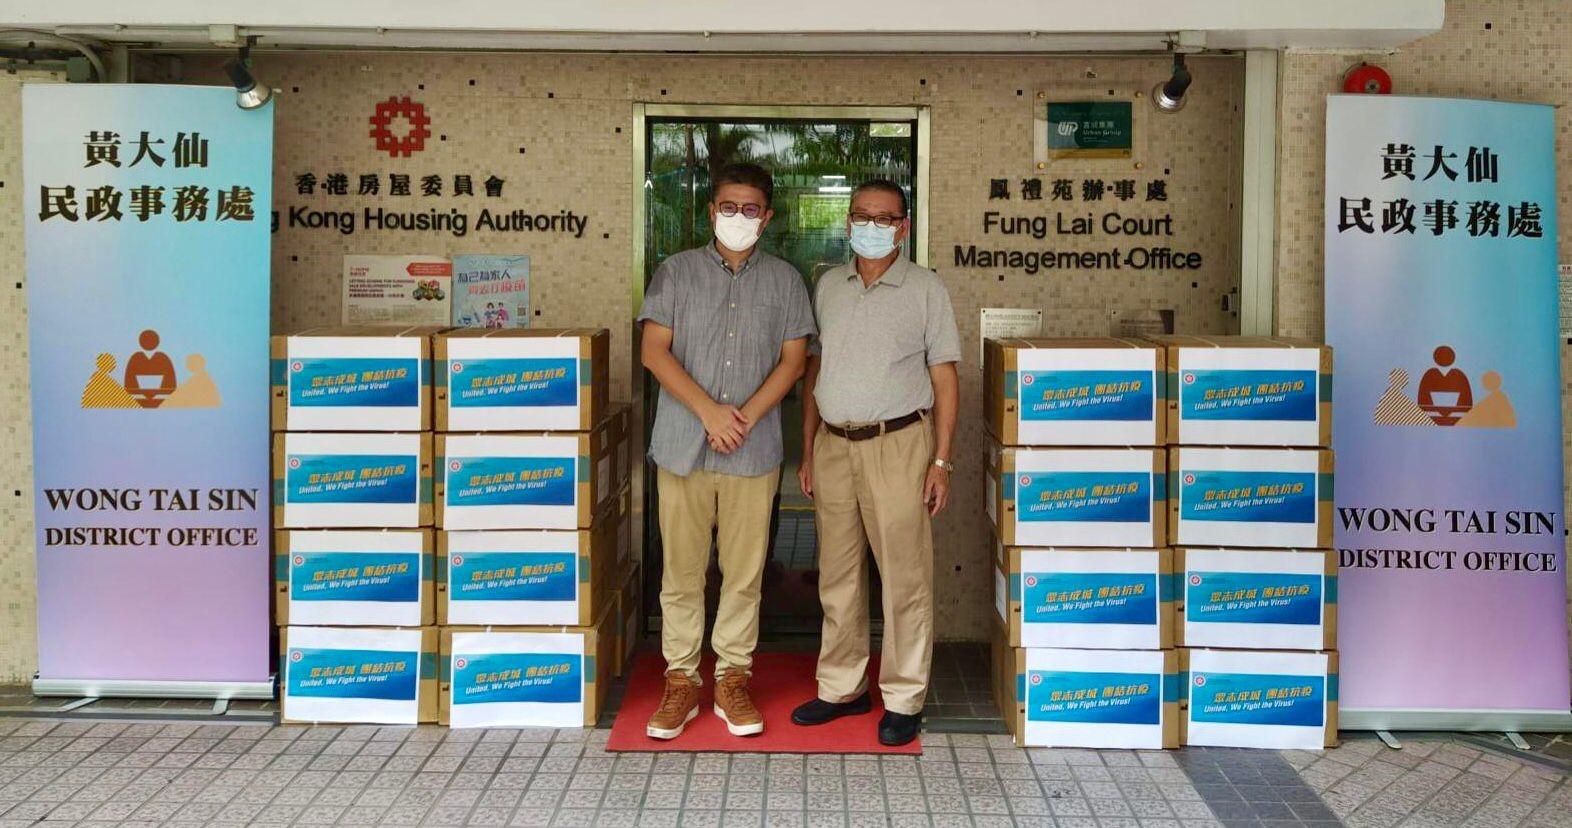 The Wong Tai Sin District Office today (June 30) distributed COVID-19 rapid test kits to households, cleansing workers and property management staff living and working in Fung Lai Court for voluntary testing through the property management company.